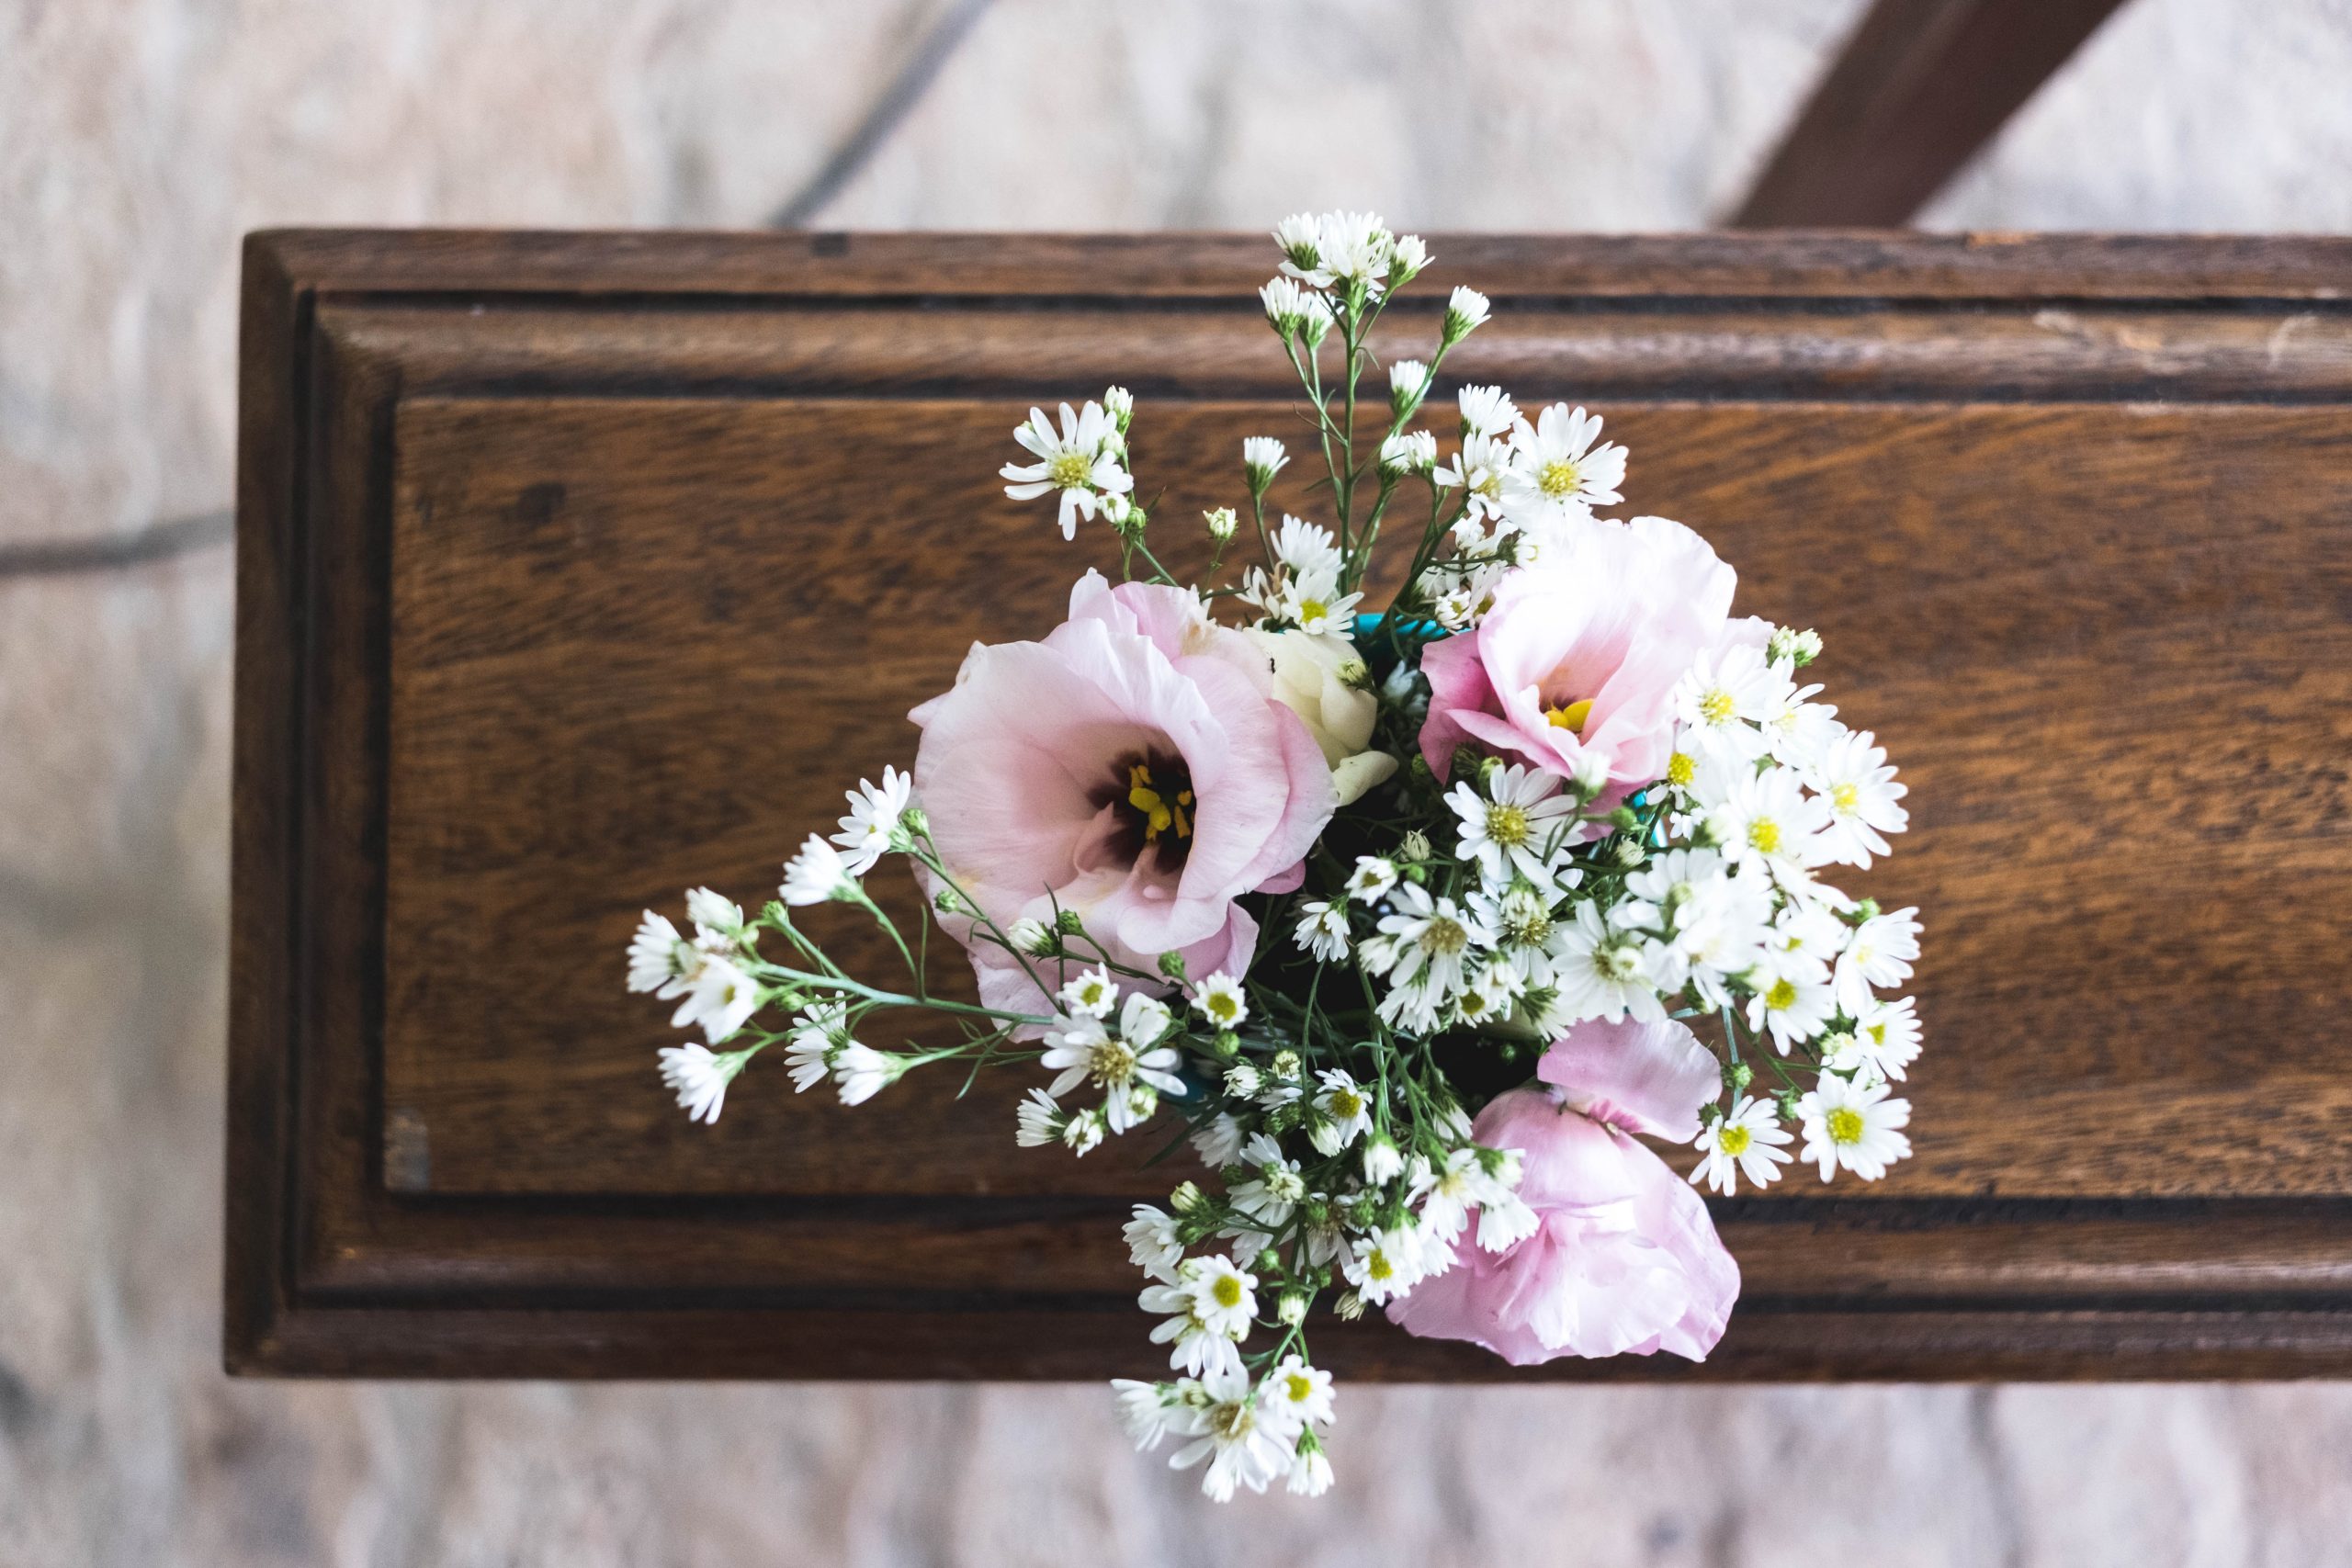 5 tips for planning a memorable funeral